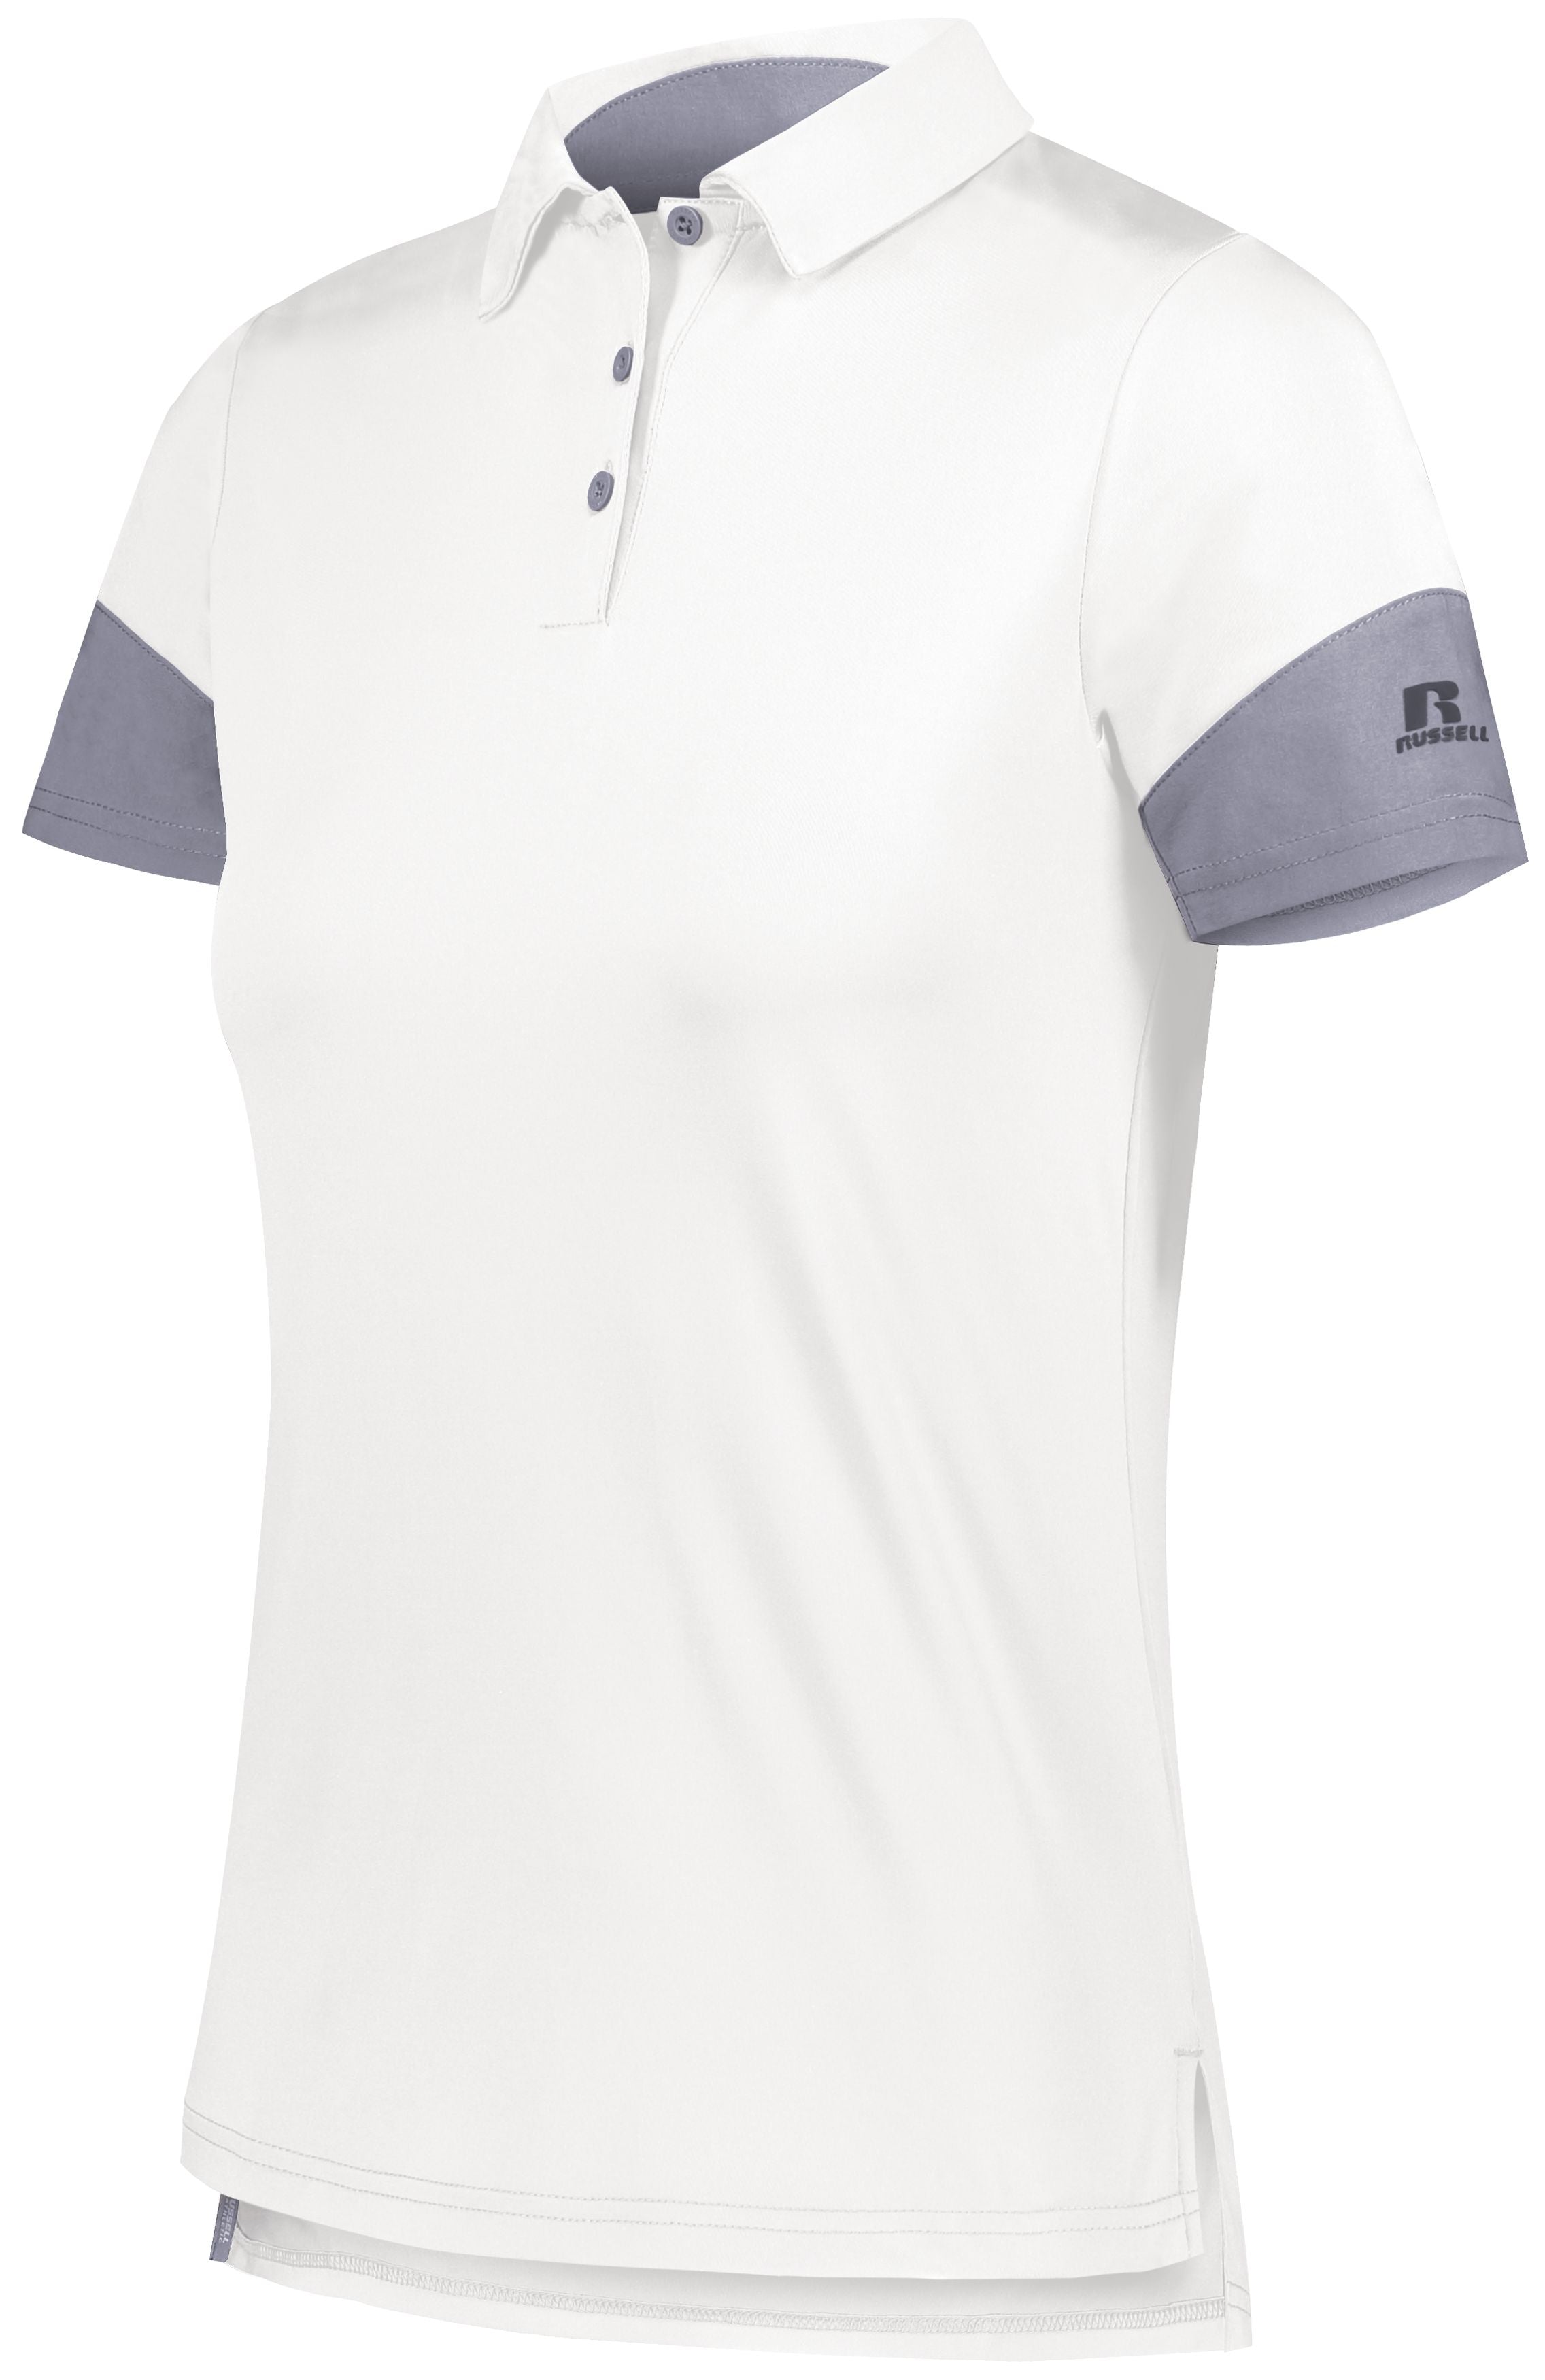 Russell Athletic Ladies Hybrid Polo in White/Steel  -Part of the Ladies, Ladies-Polo, Polos, Russell-Athletic-Products, Shirts product lines at KanaleyCreations.com